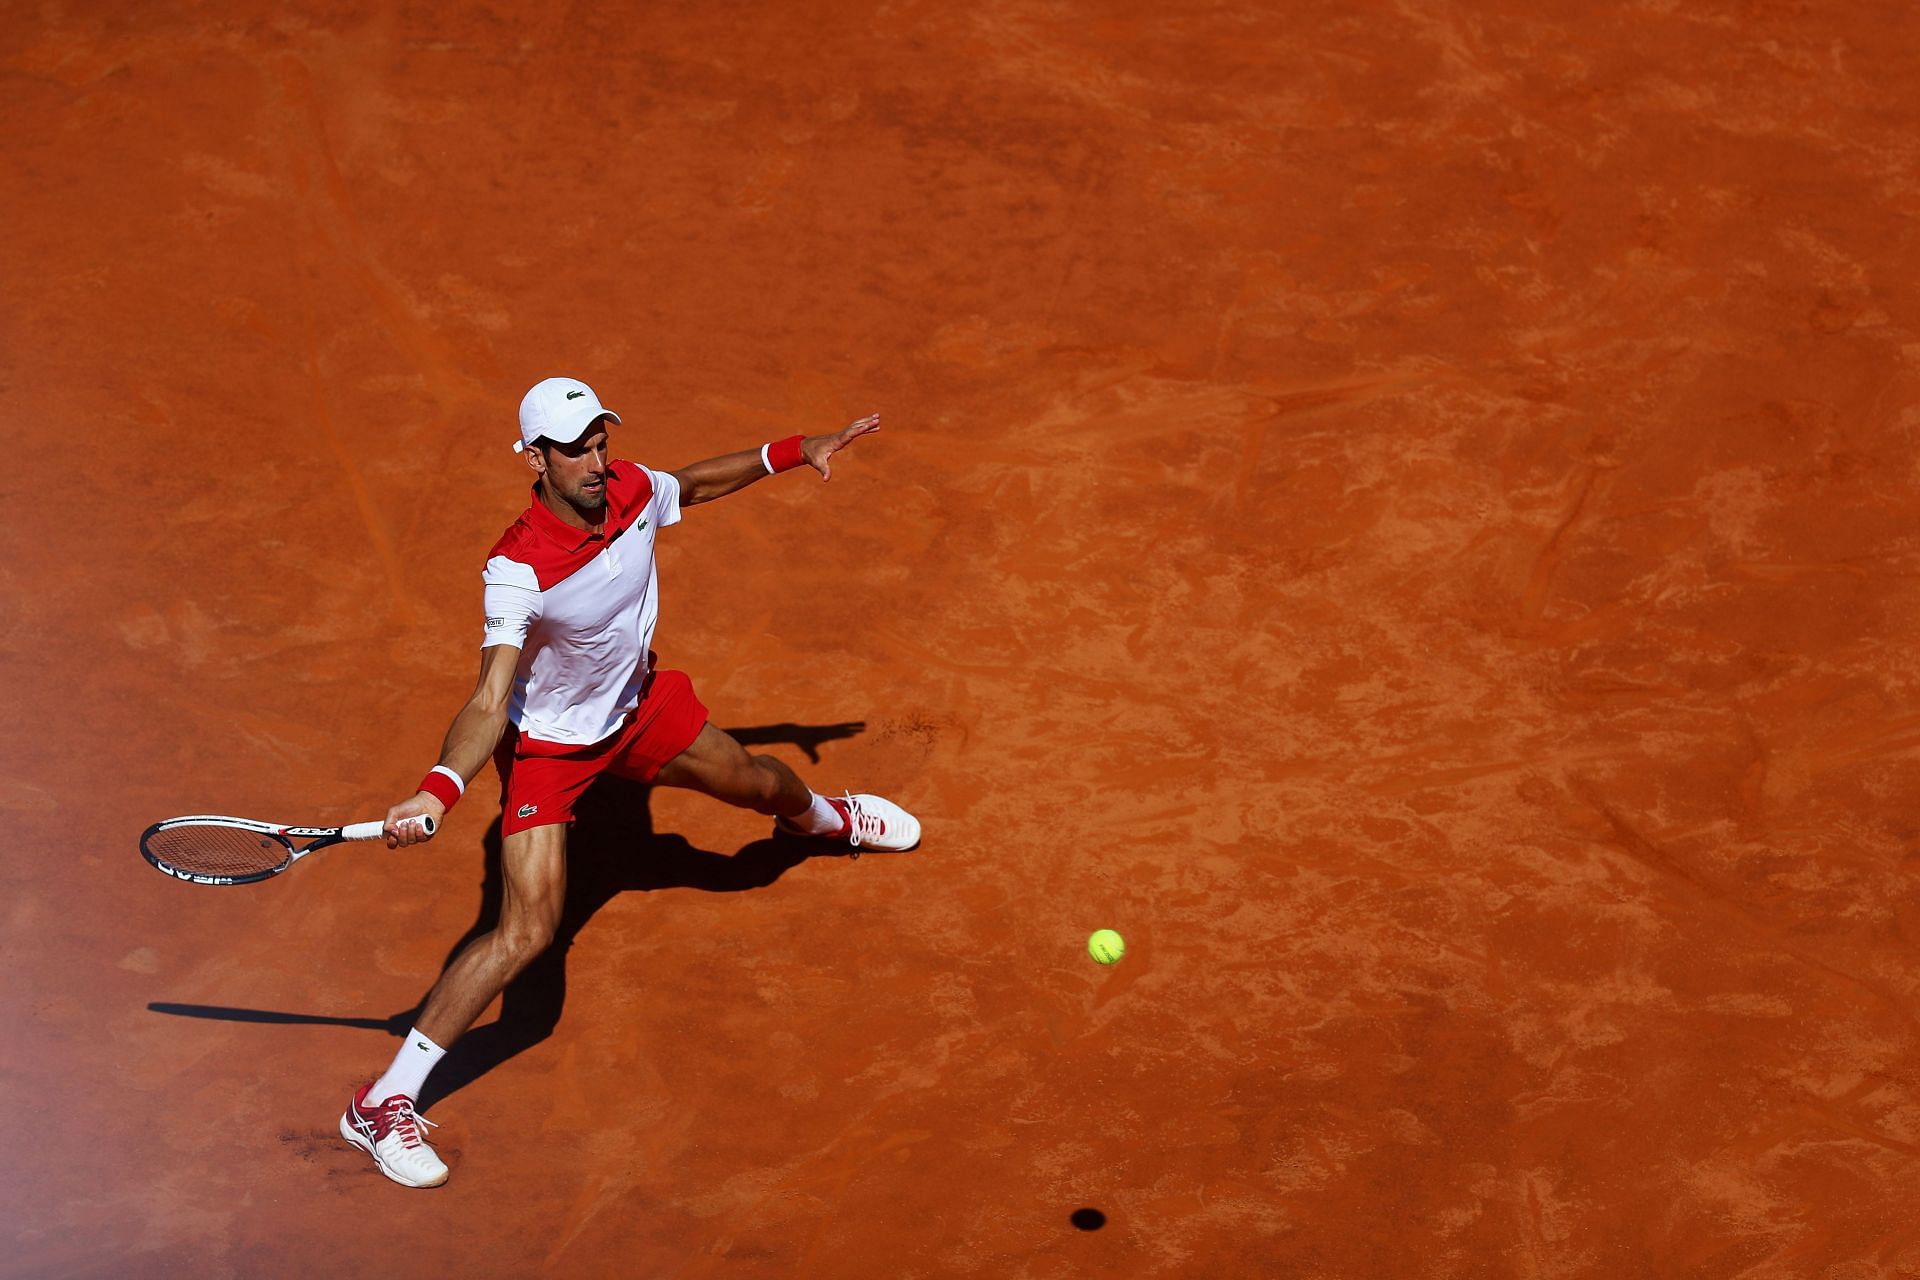 The Serb stretches to make a return on clay